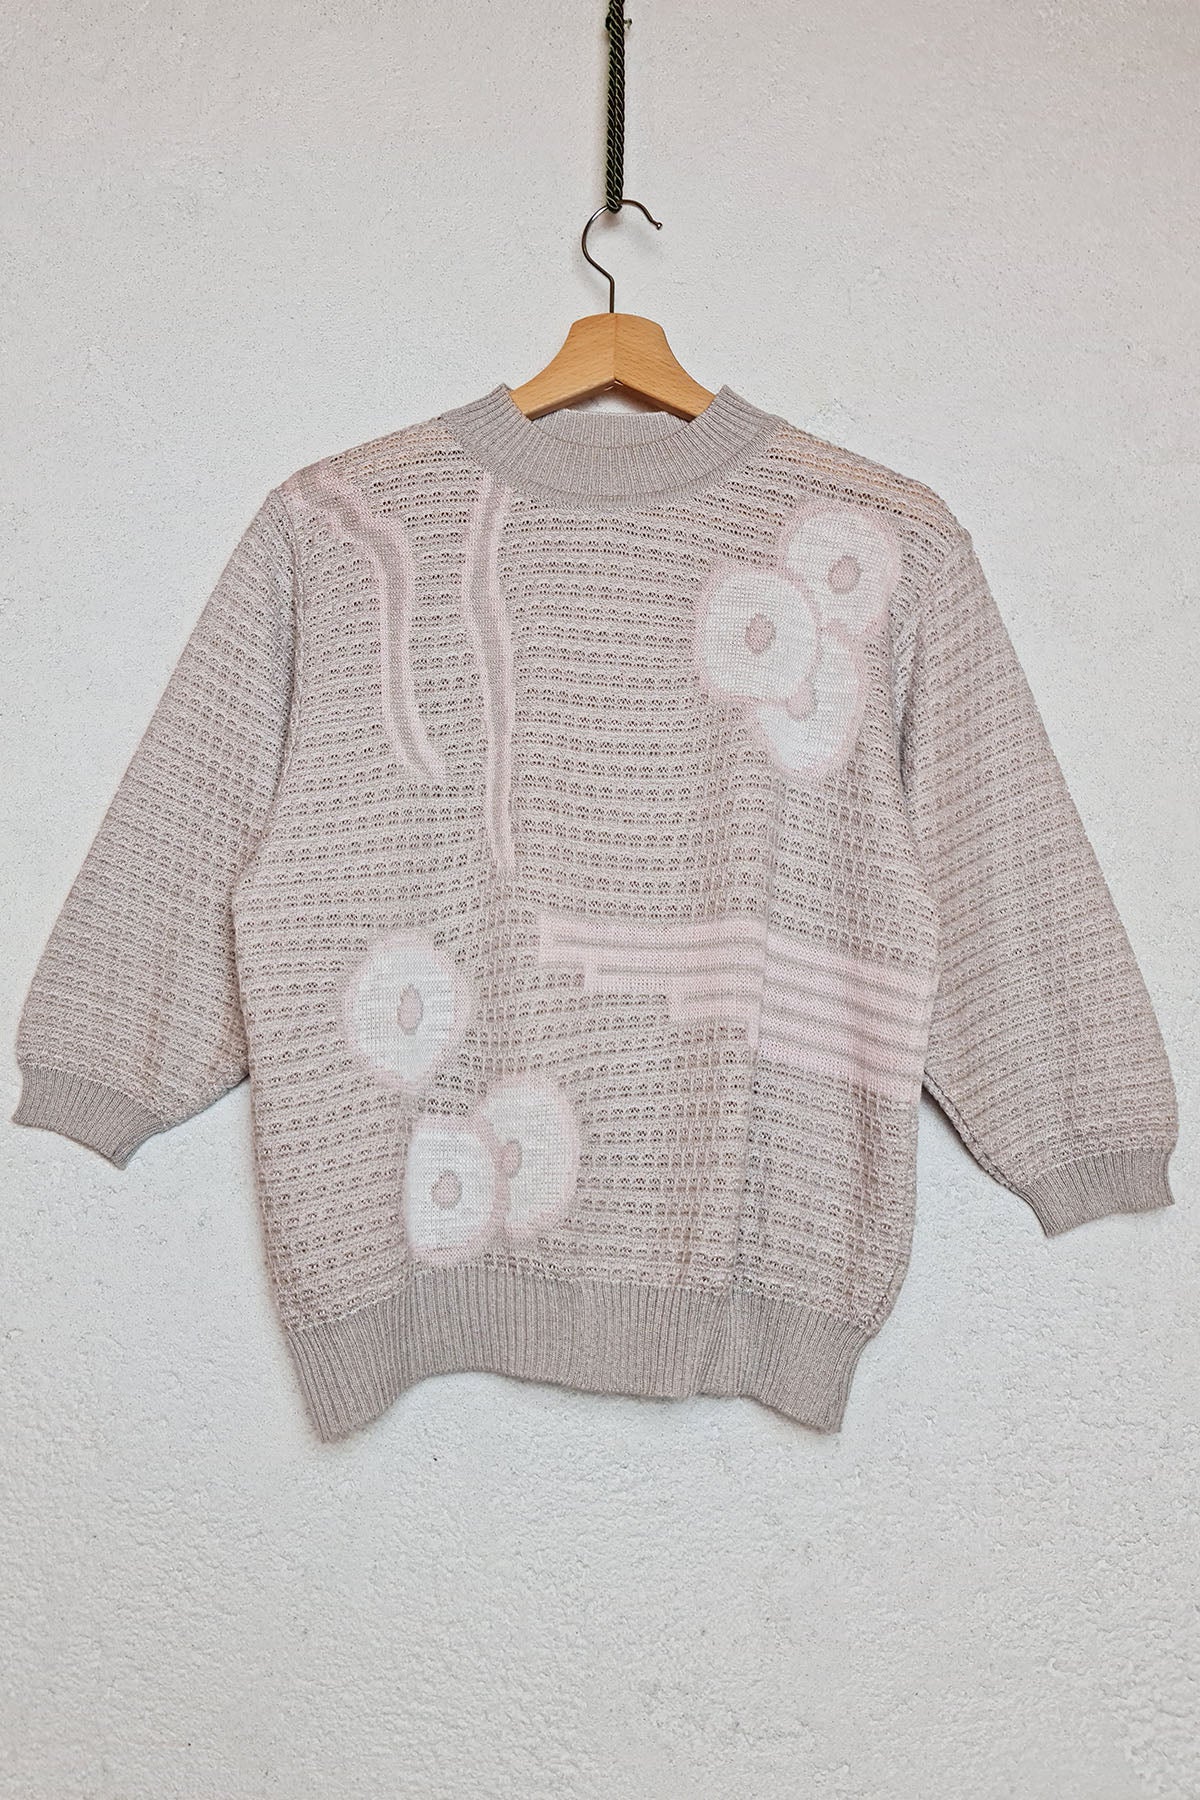 Beige Abstract Embroidery Vintage Pullover